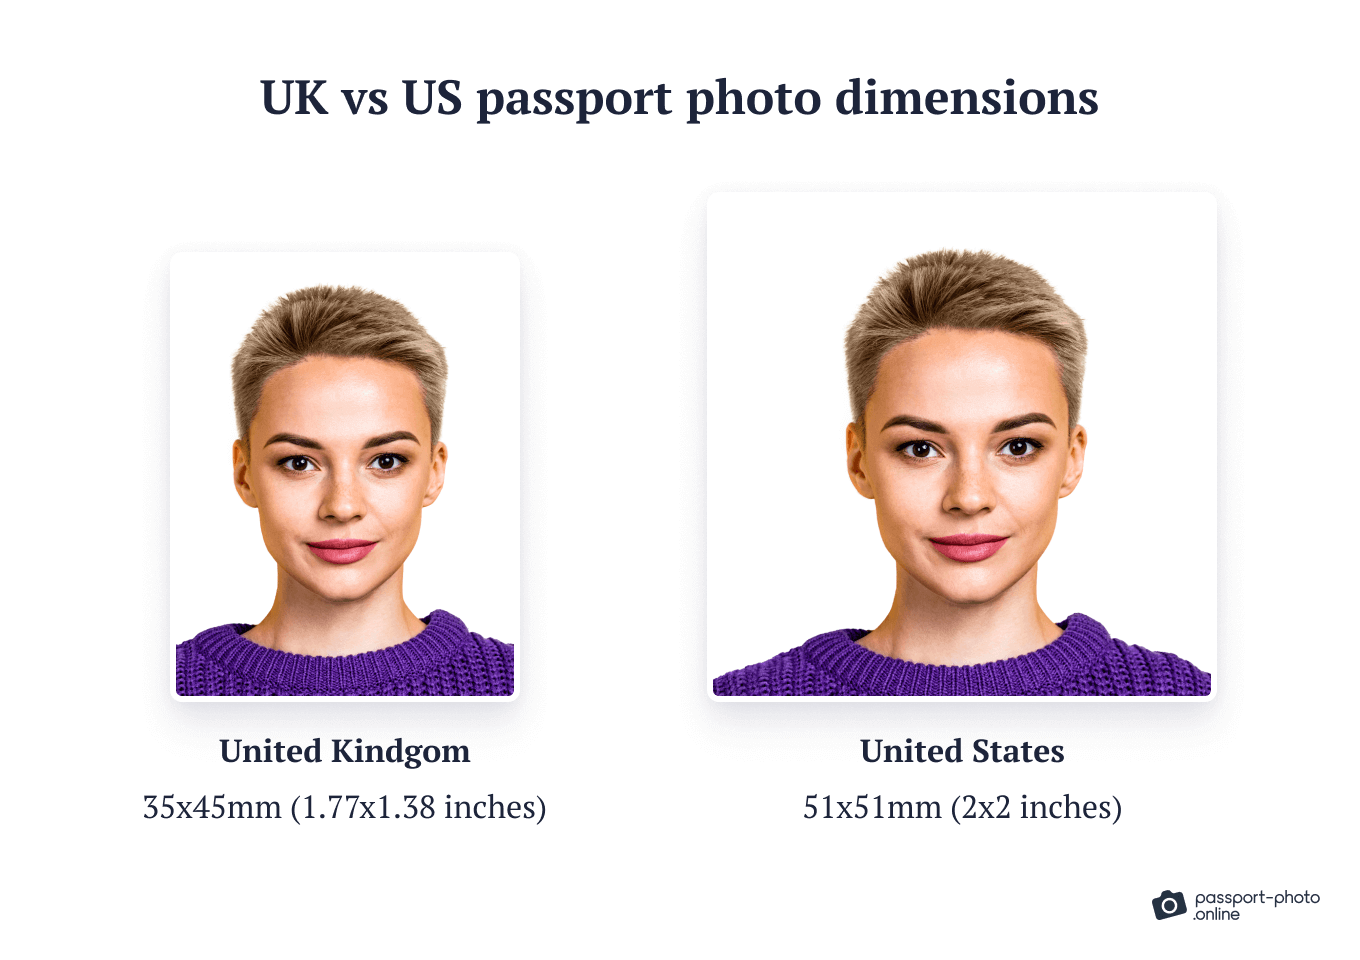 Look at the side-by-side comparison between UK and US passport photos—both the size and aspect ratio differ significantly between the two pictures.